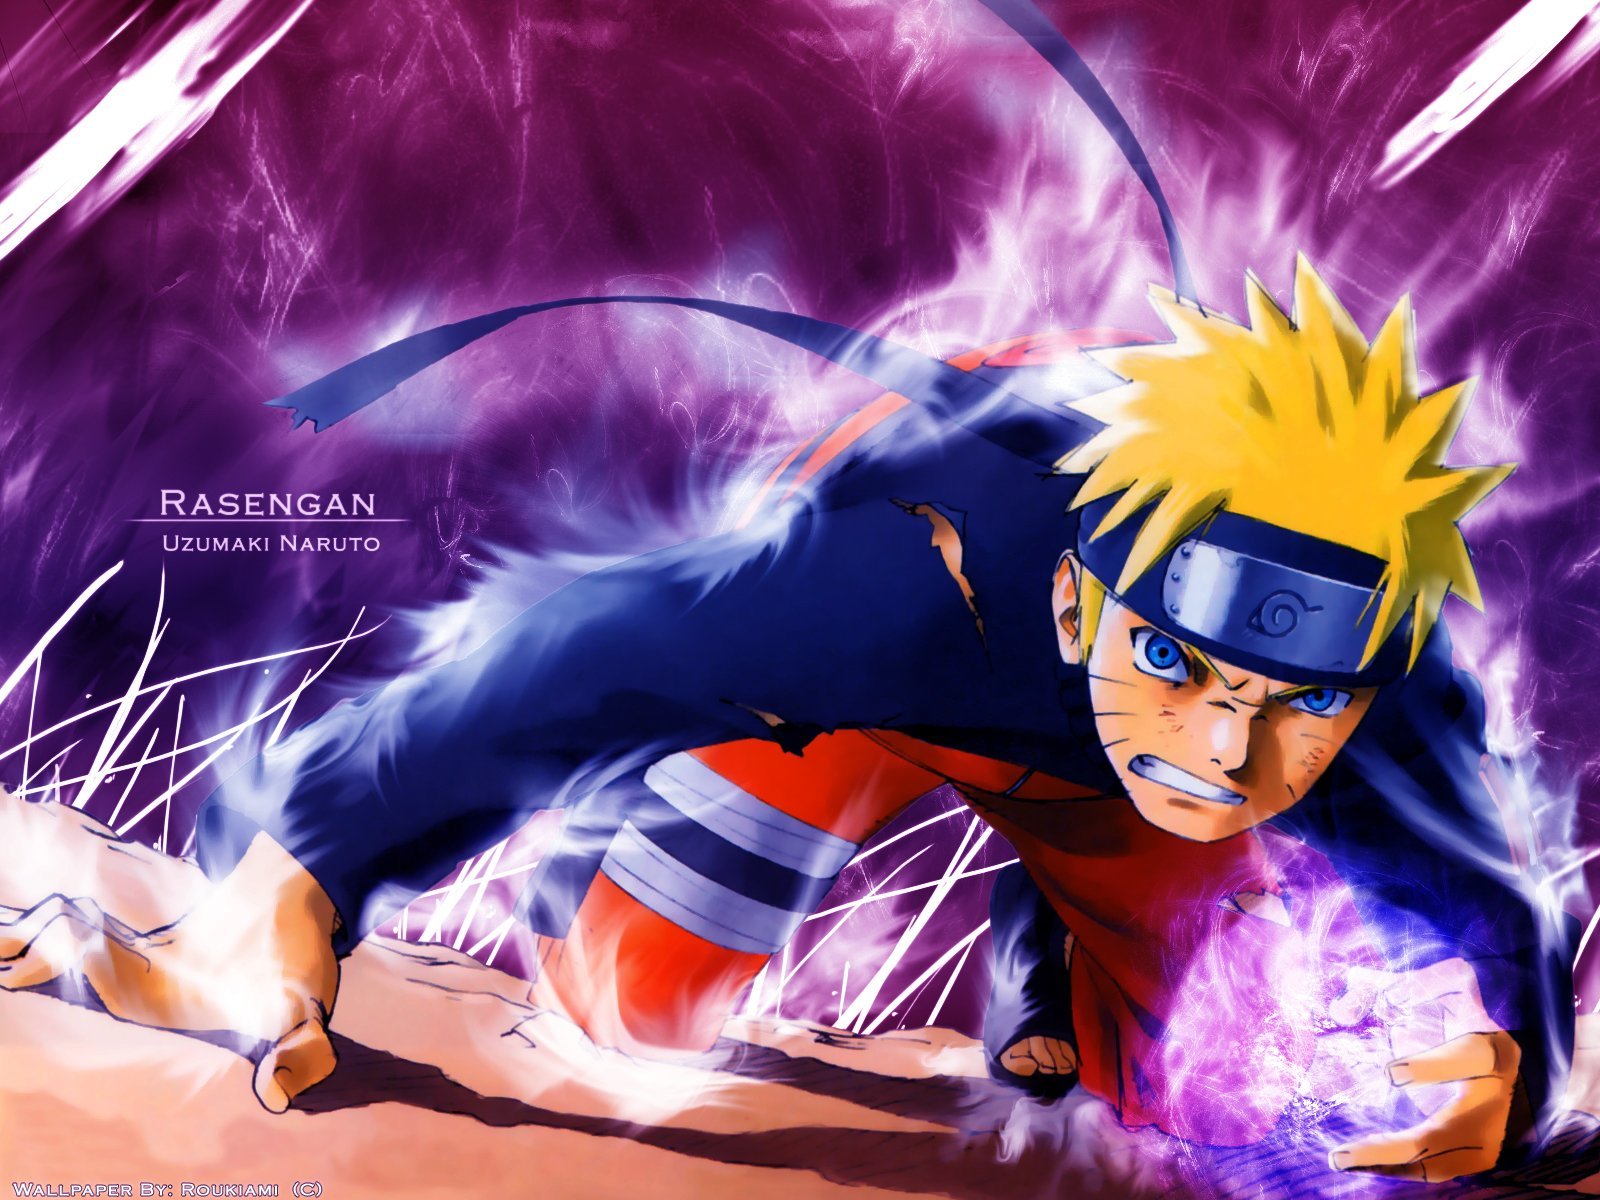 12228 download wallpaper naruto, anime, cartoon screensavers and pictures for free